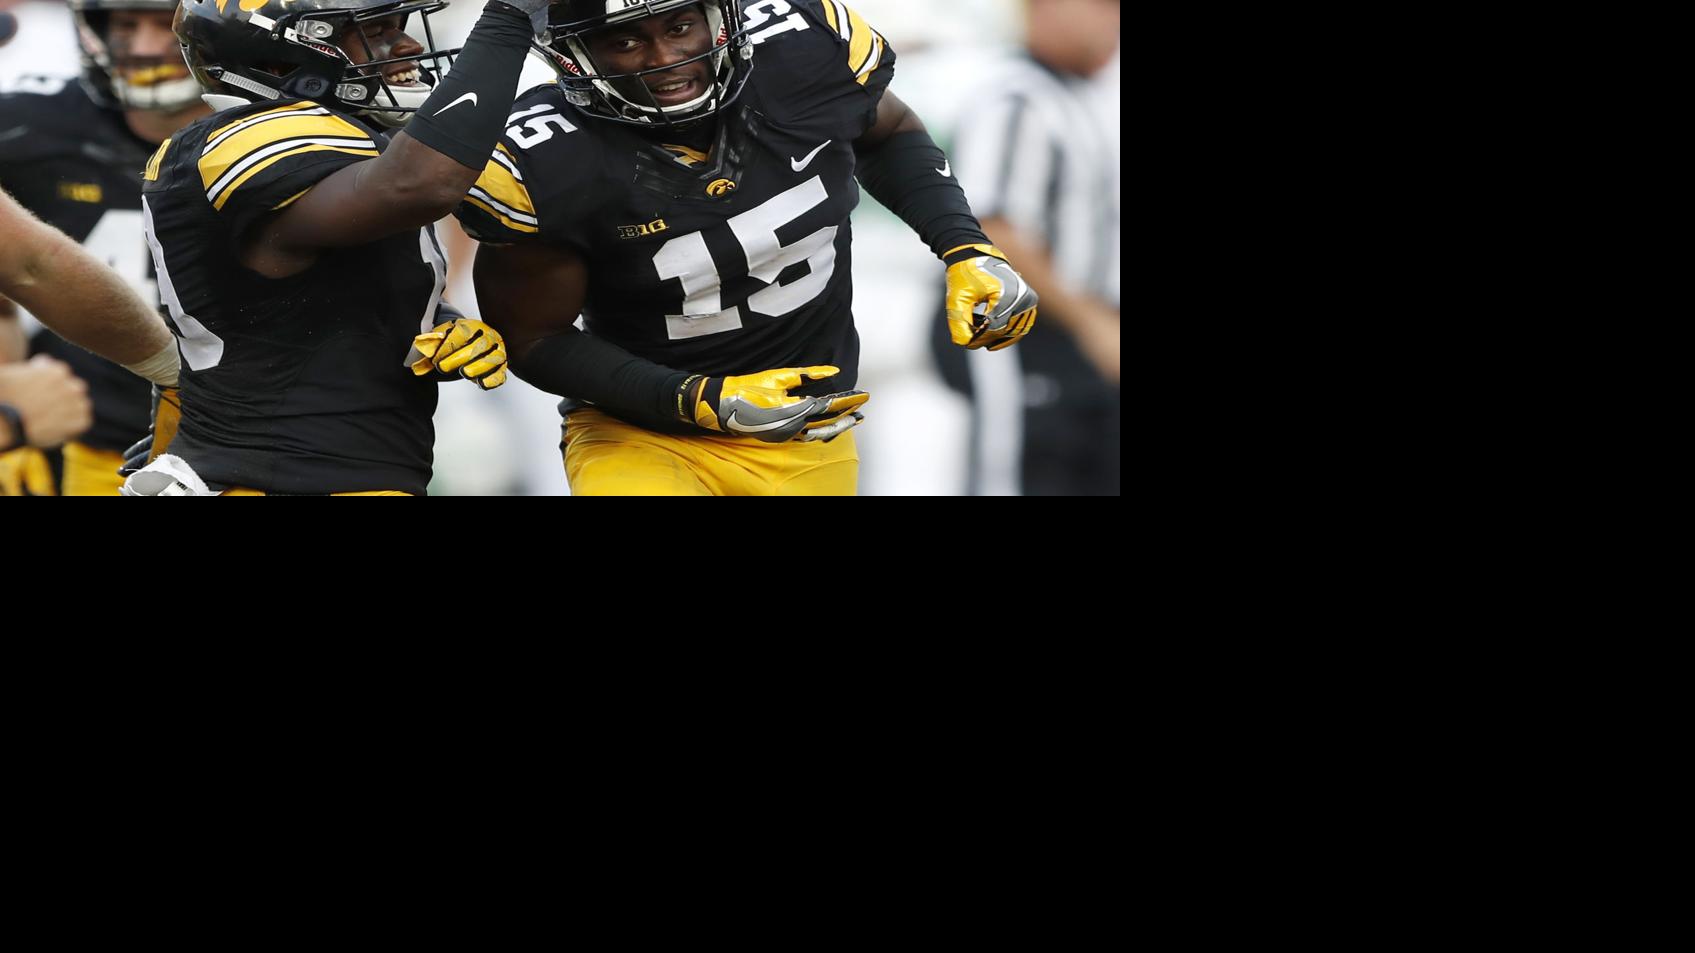 No shortage of January storylines for Hawkeyes